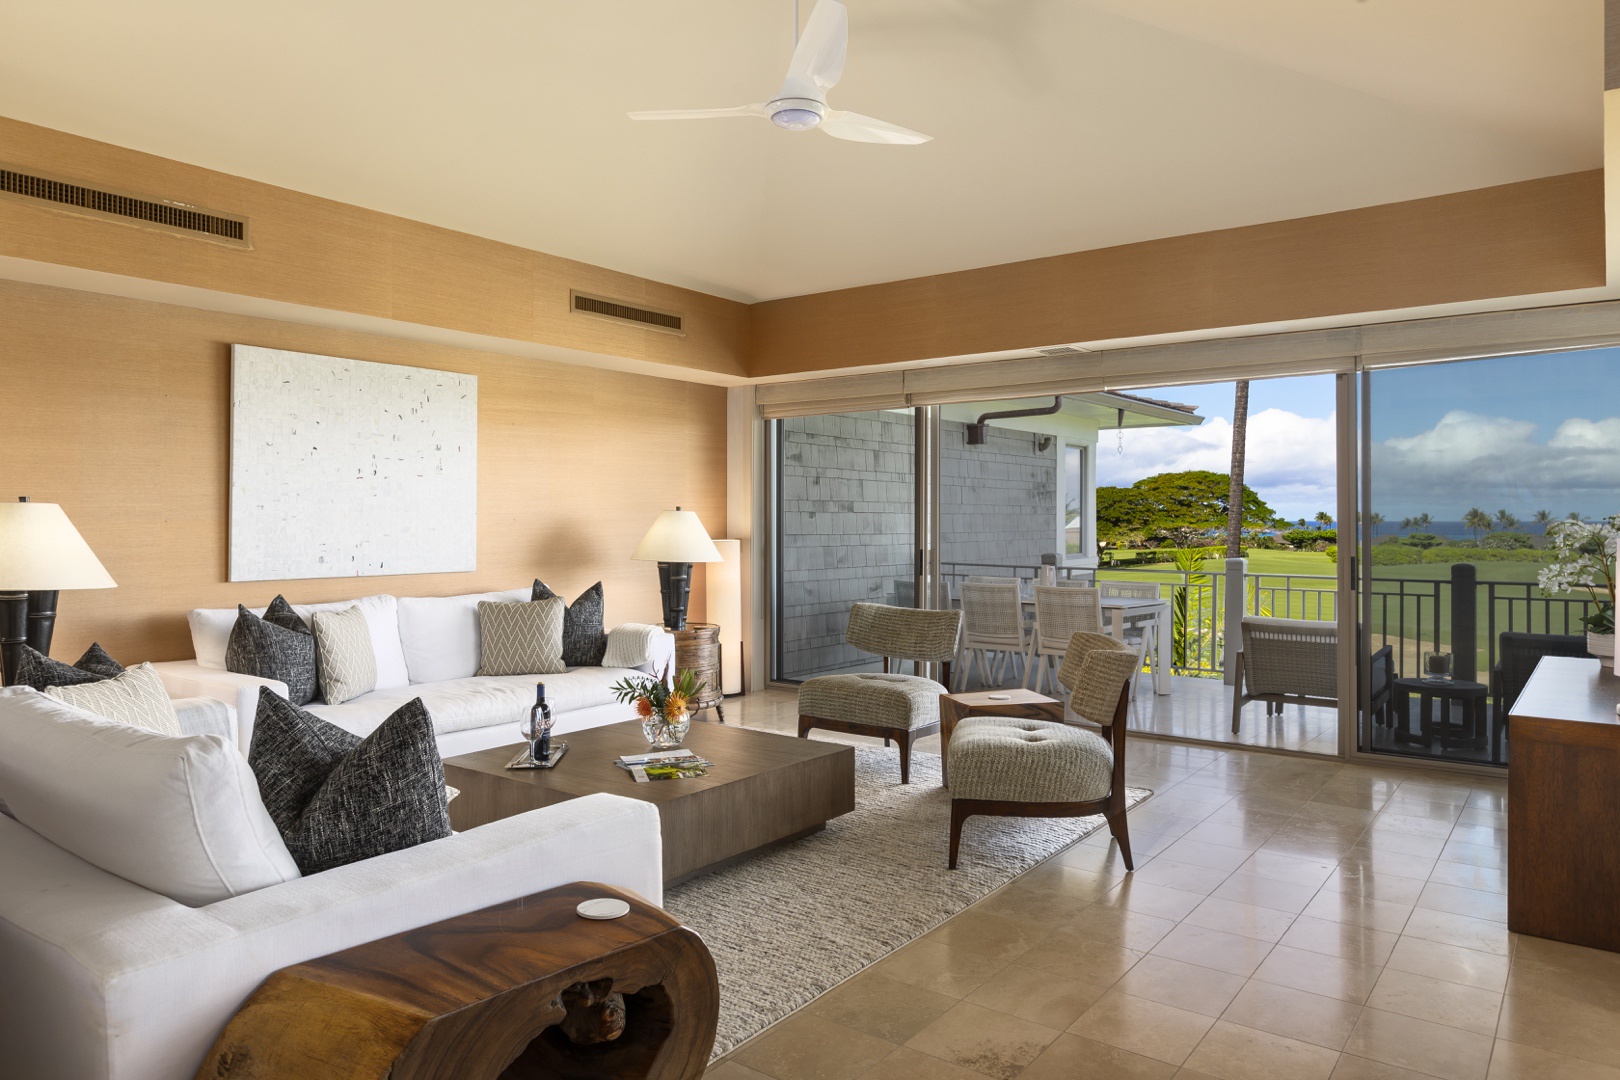 Kailua Kona Vacation Rentals, 3BD Palm Villa (130B) at Four Seasons Resort at Hualalai - The elegant great room extends out to the covered lanai with dining for six